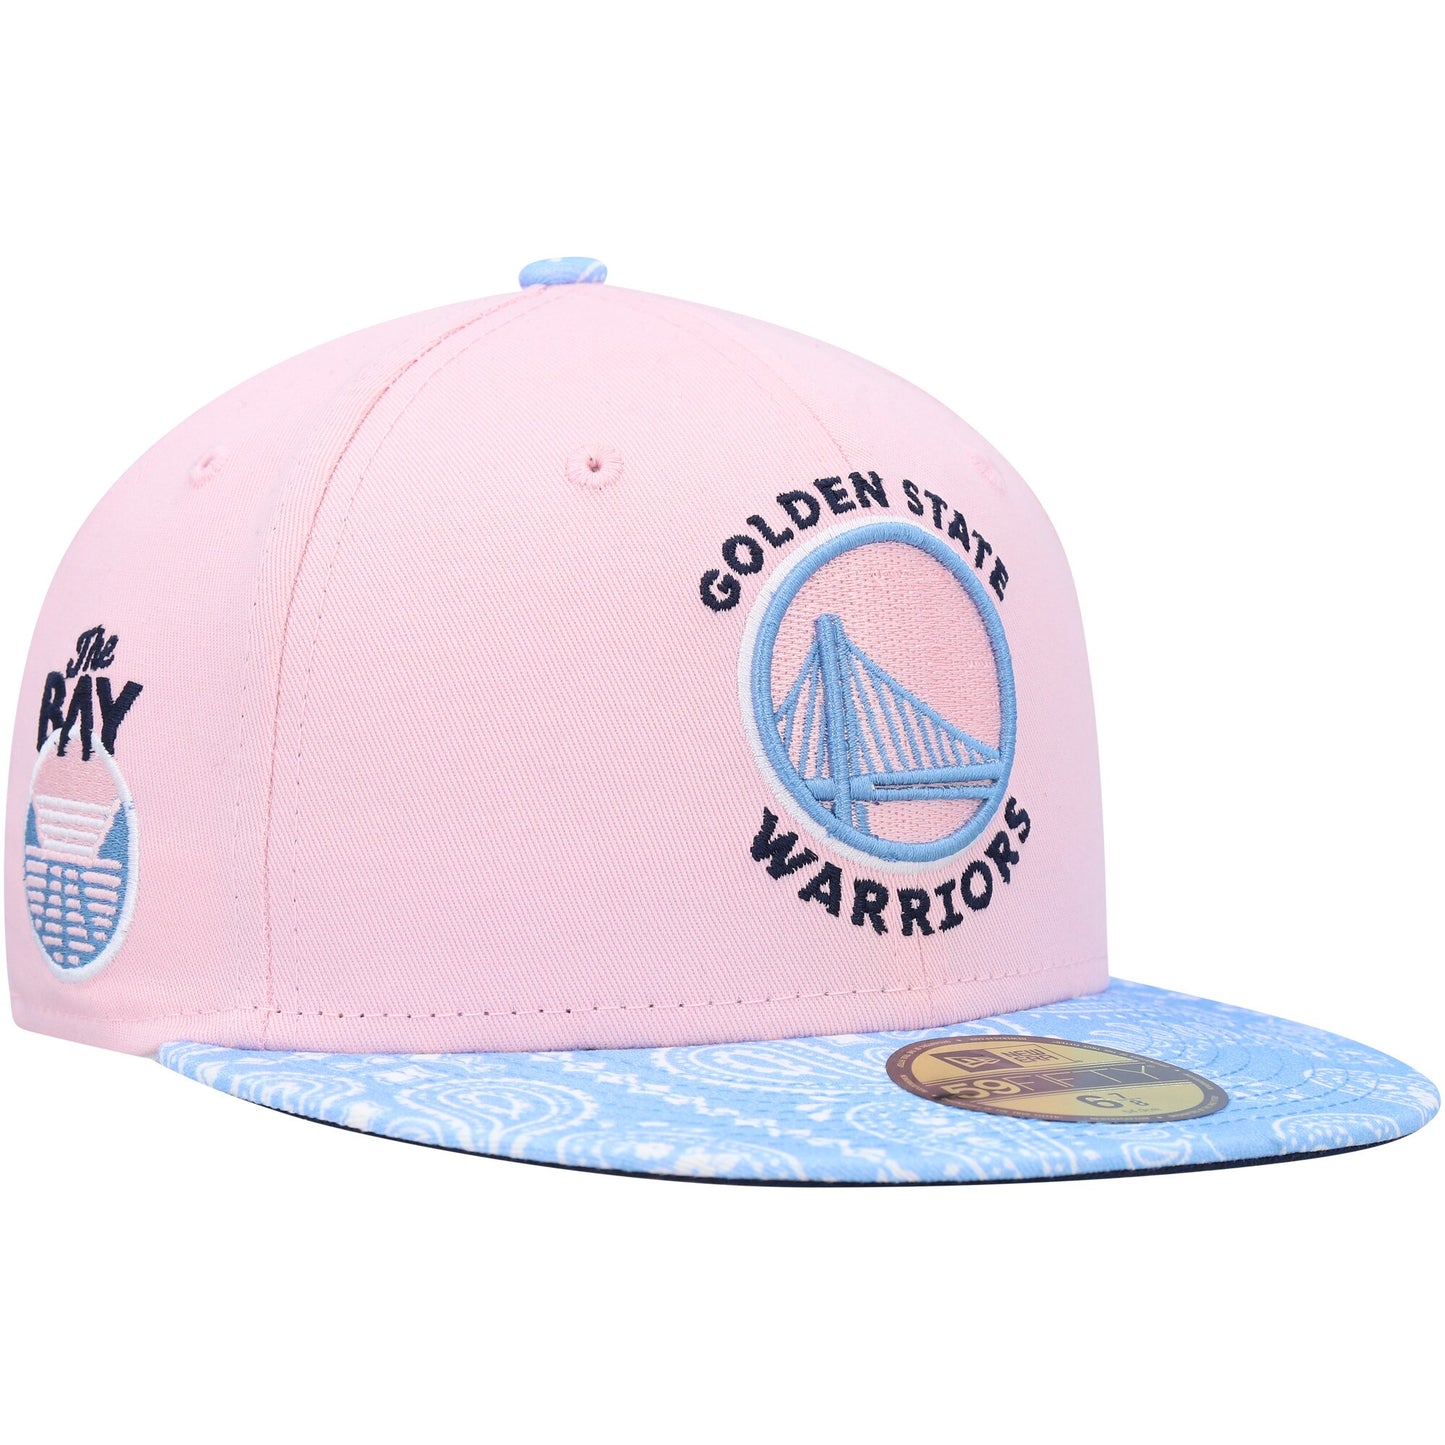 Golden State Warriors New Era Paisley Visor 59FIFTY Fitted Hat - Pink/Light Blue